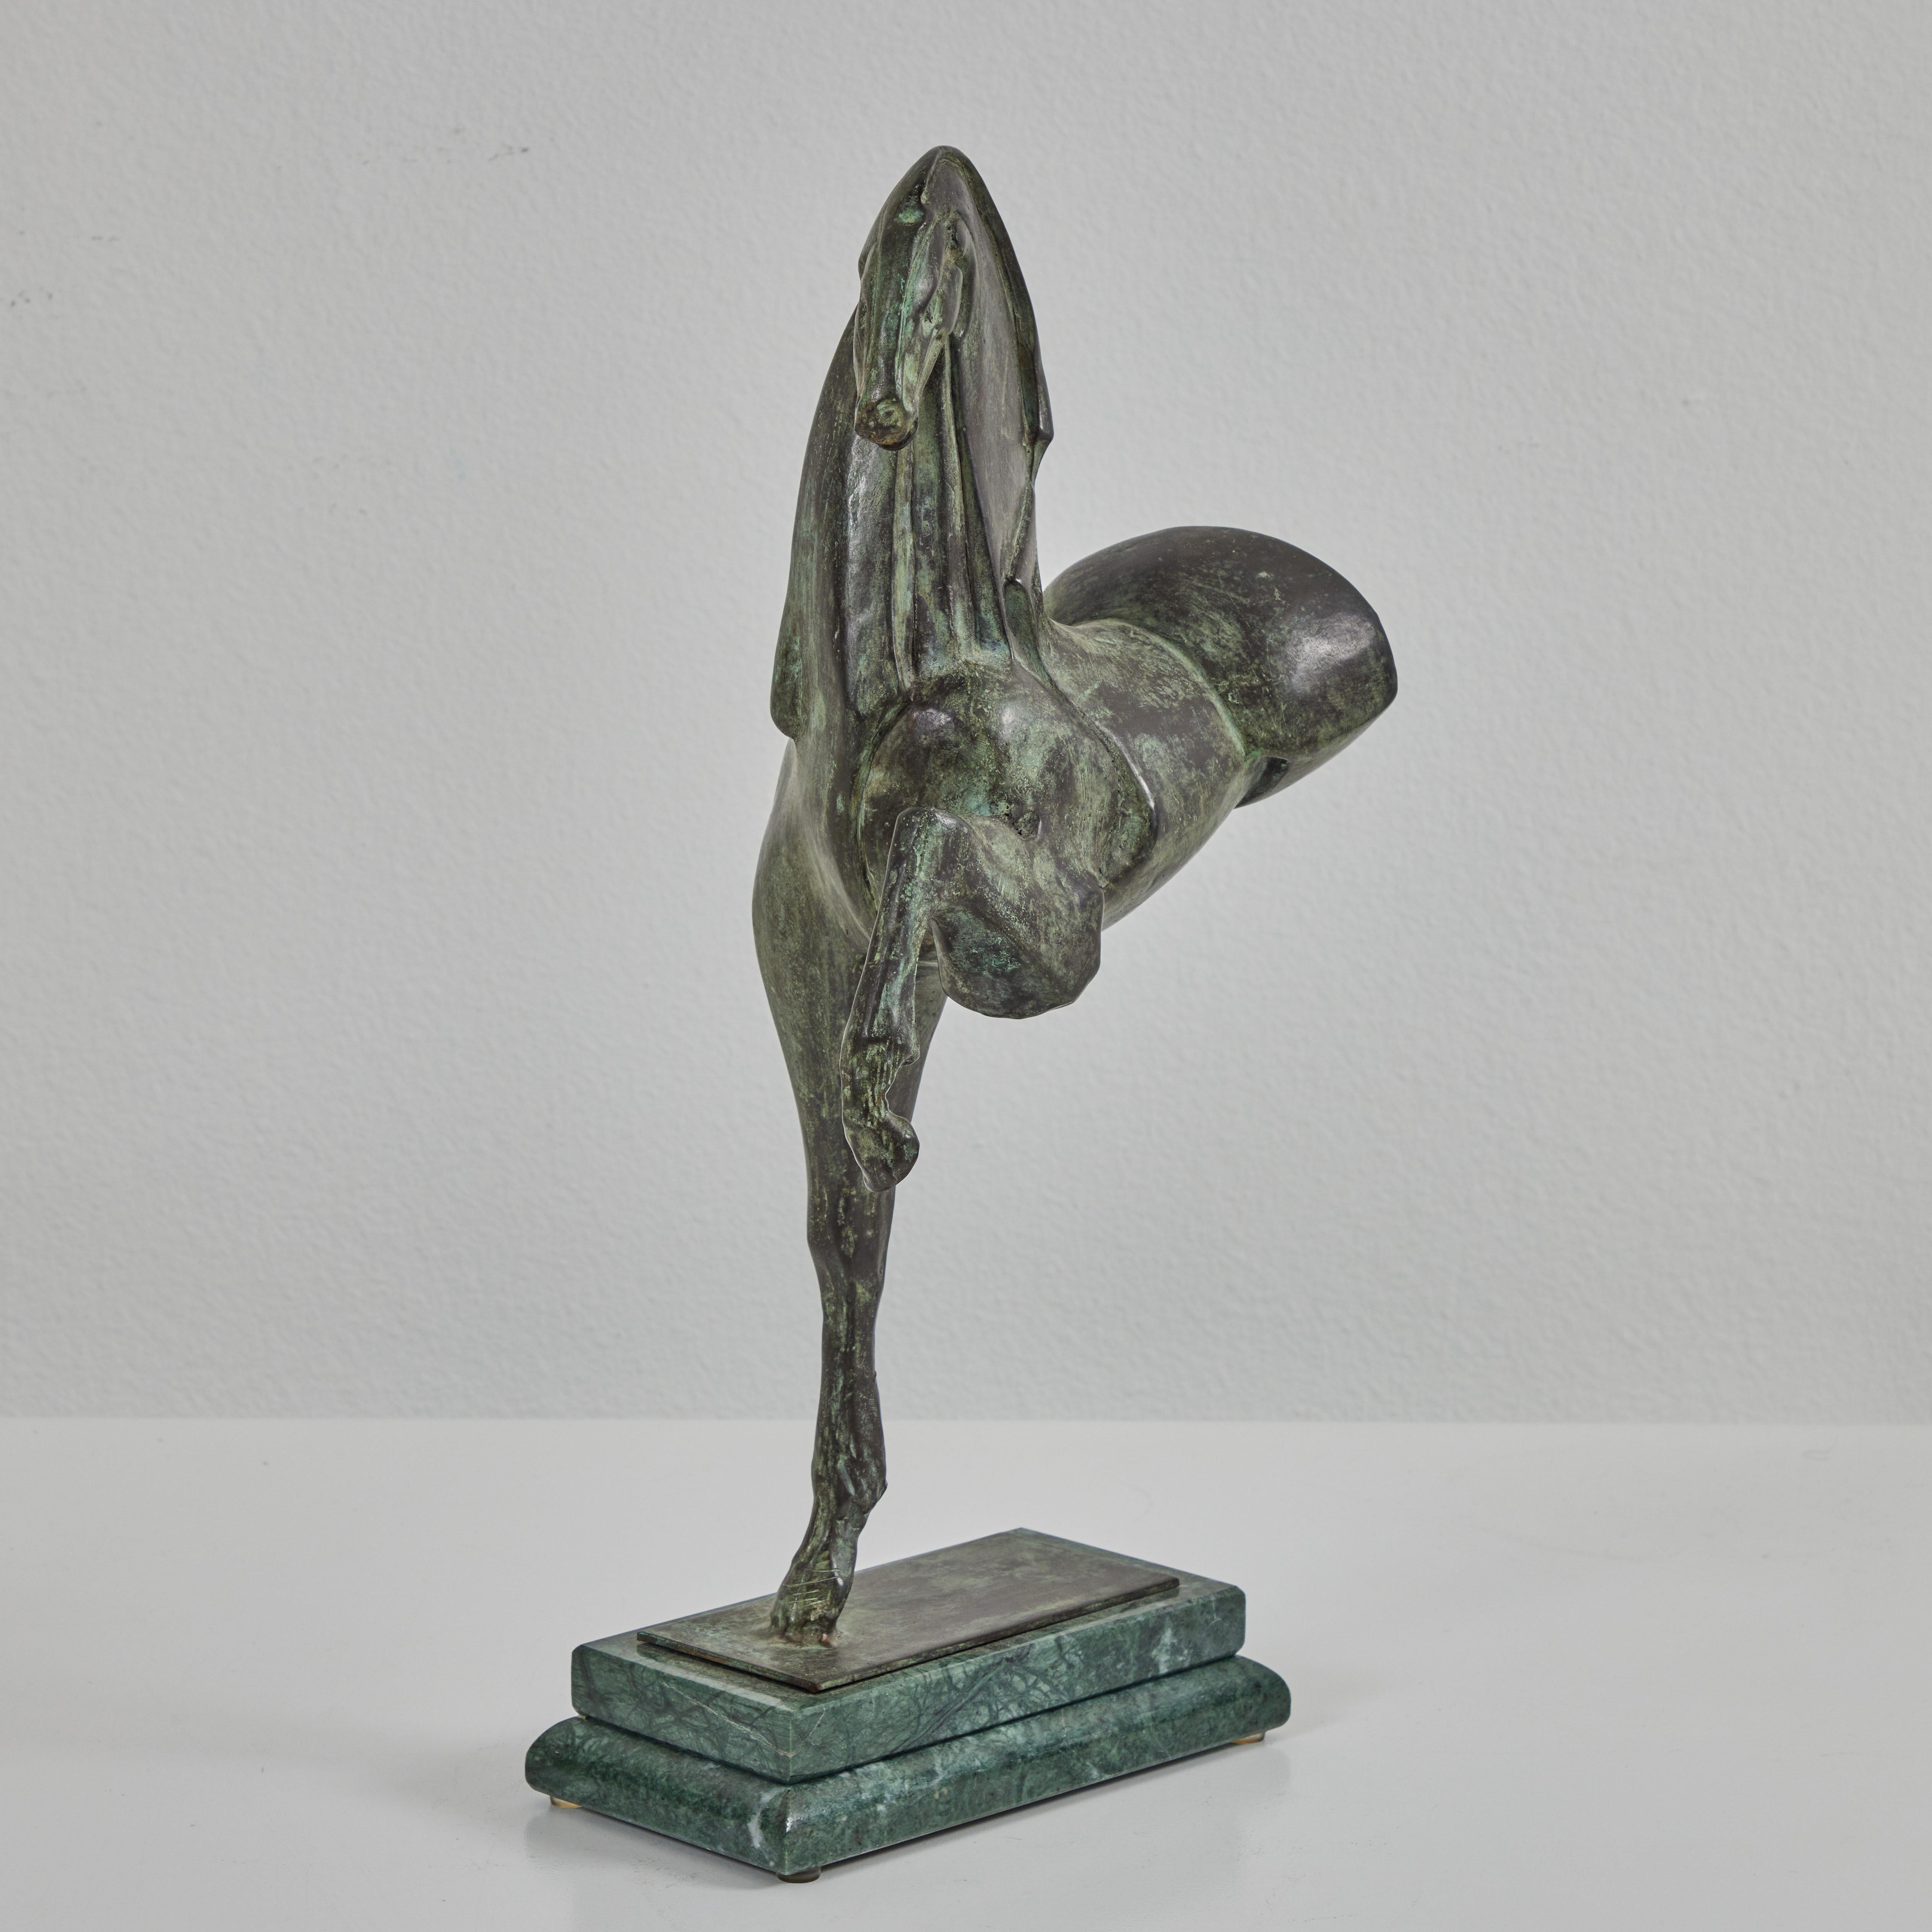 This sculpture by Claudio Nicoli portrays an astute horse balanced on one front leg. The scattered application of patina gives the appearance of a rich texture. It is secured onto a marble base. The piece is signed by Nicoli on the back of the